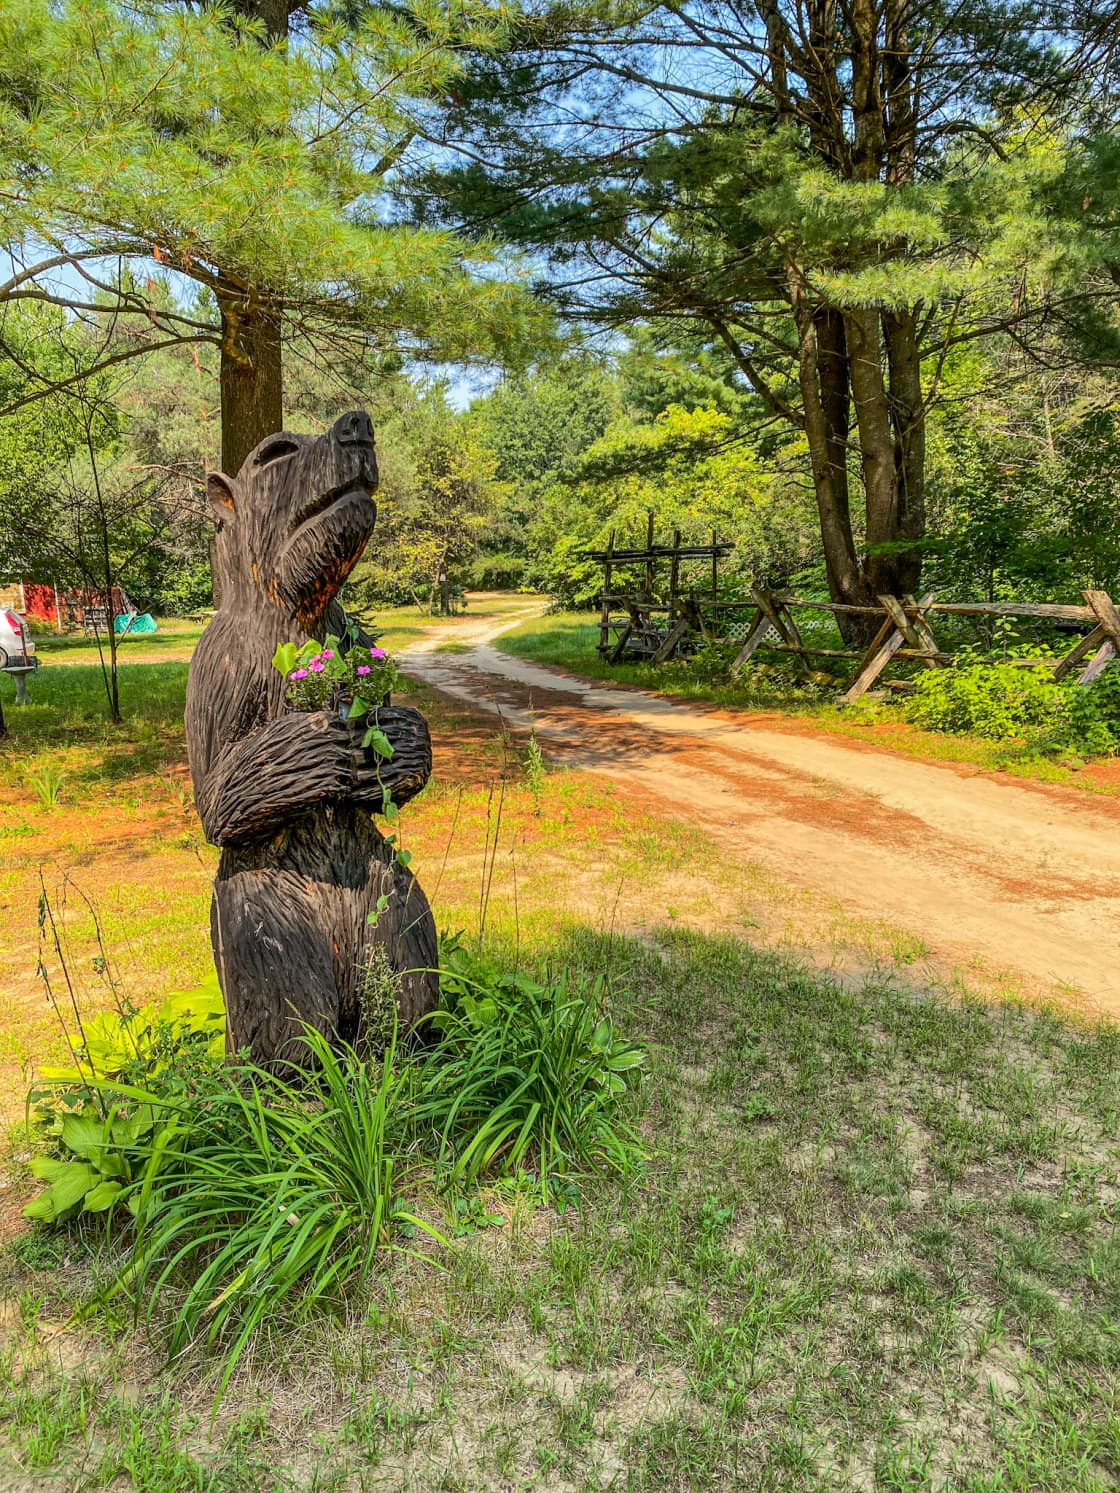 Beary Potter greets visitors who arrive at The Pines..